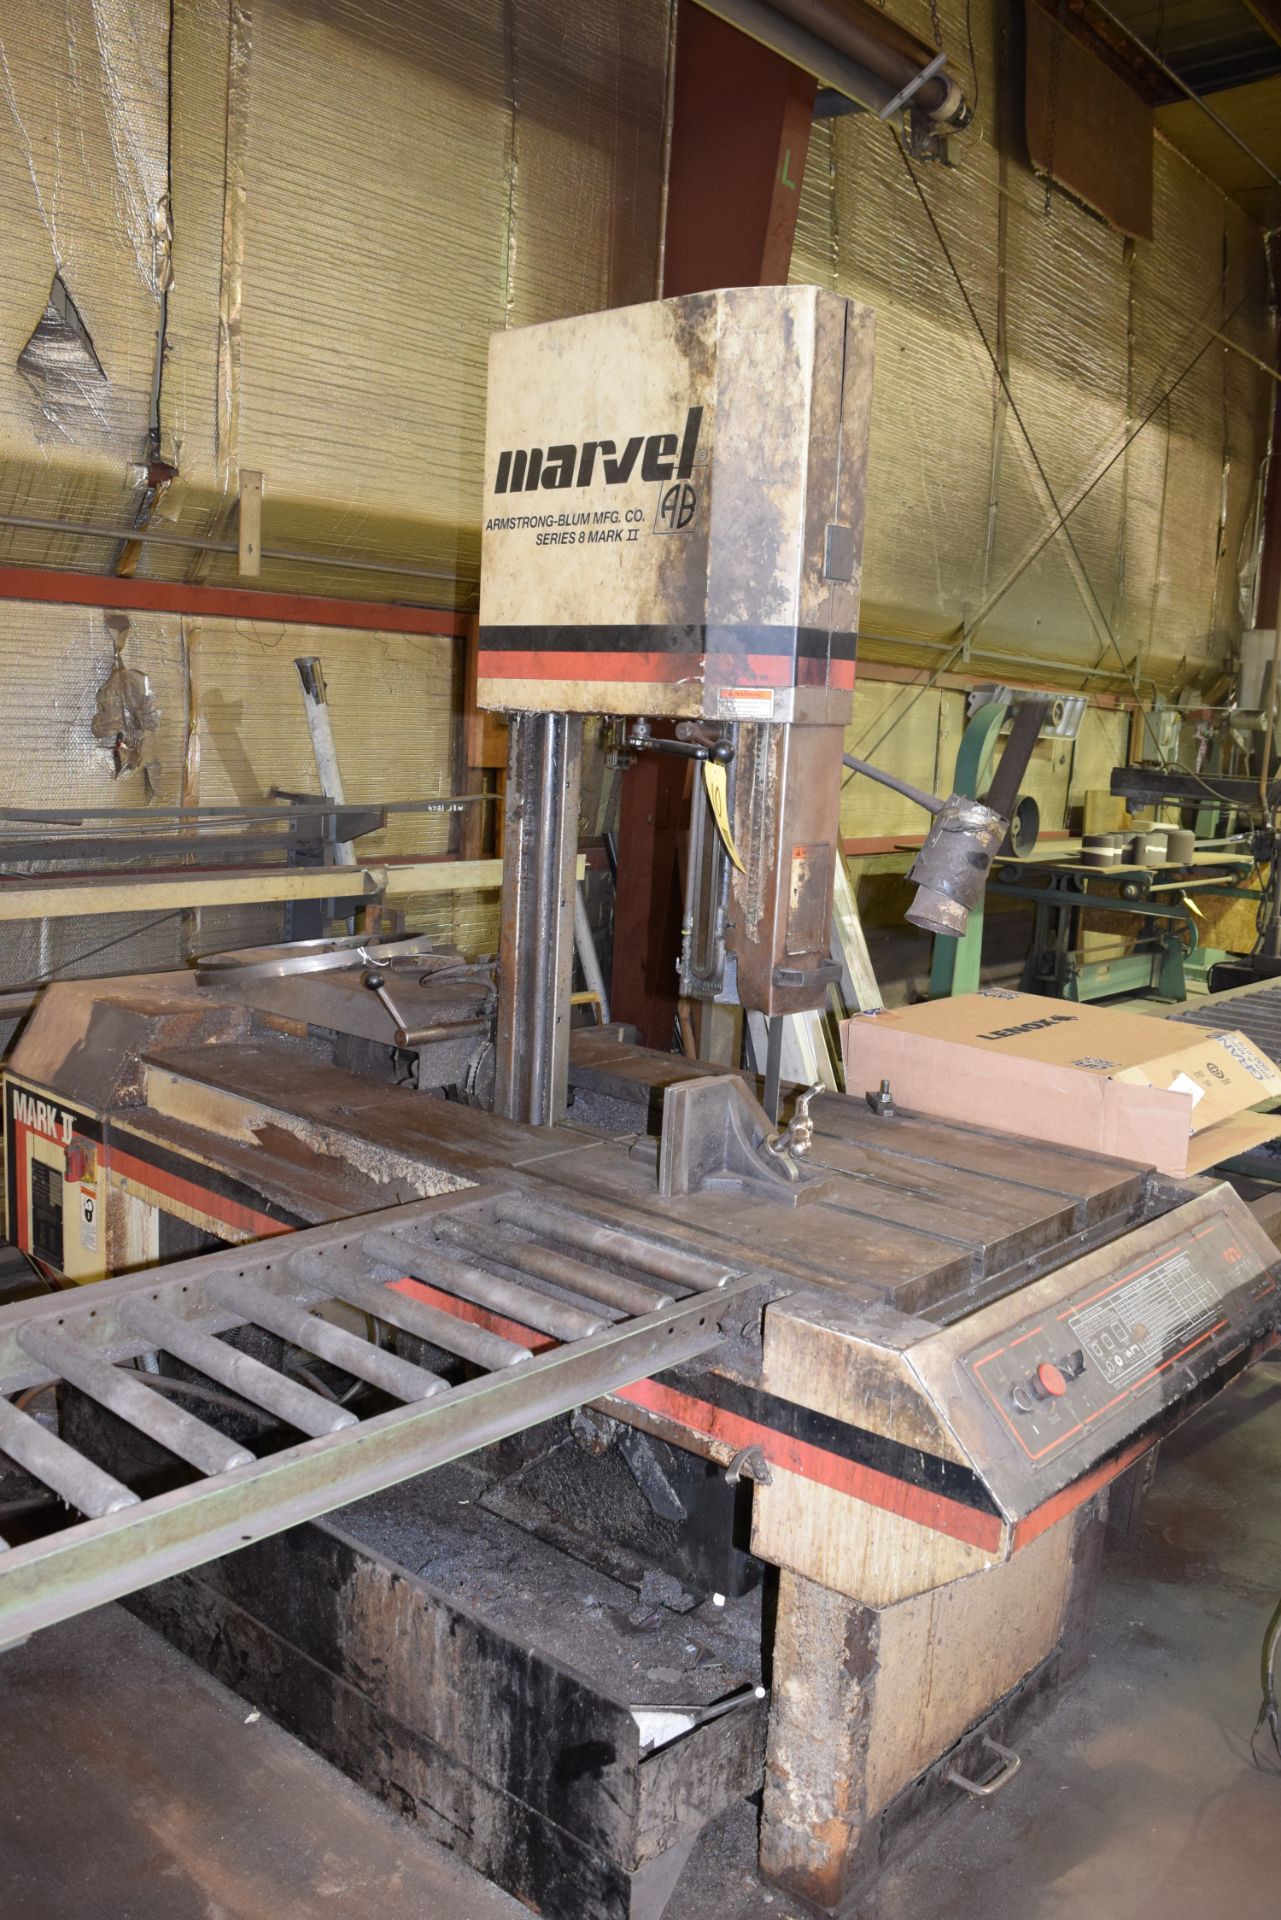 Marvel Series 8 Mark II Vertical Band Saw, SN: 829175, 230 Volt, 3-Phase with 20' Long X 16''